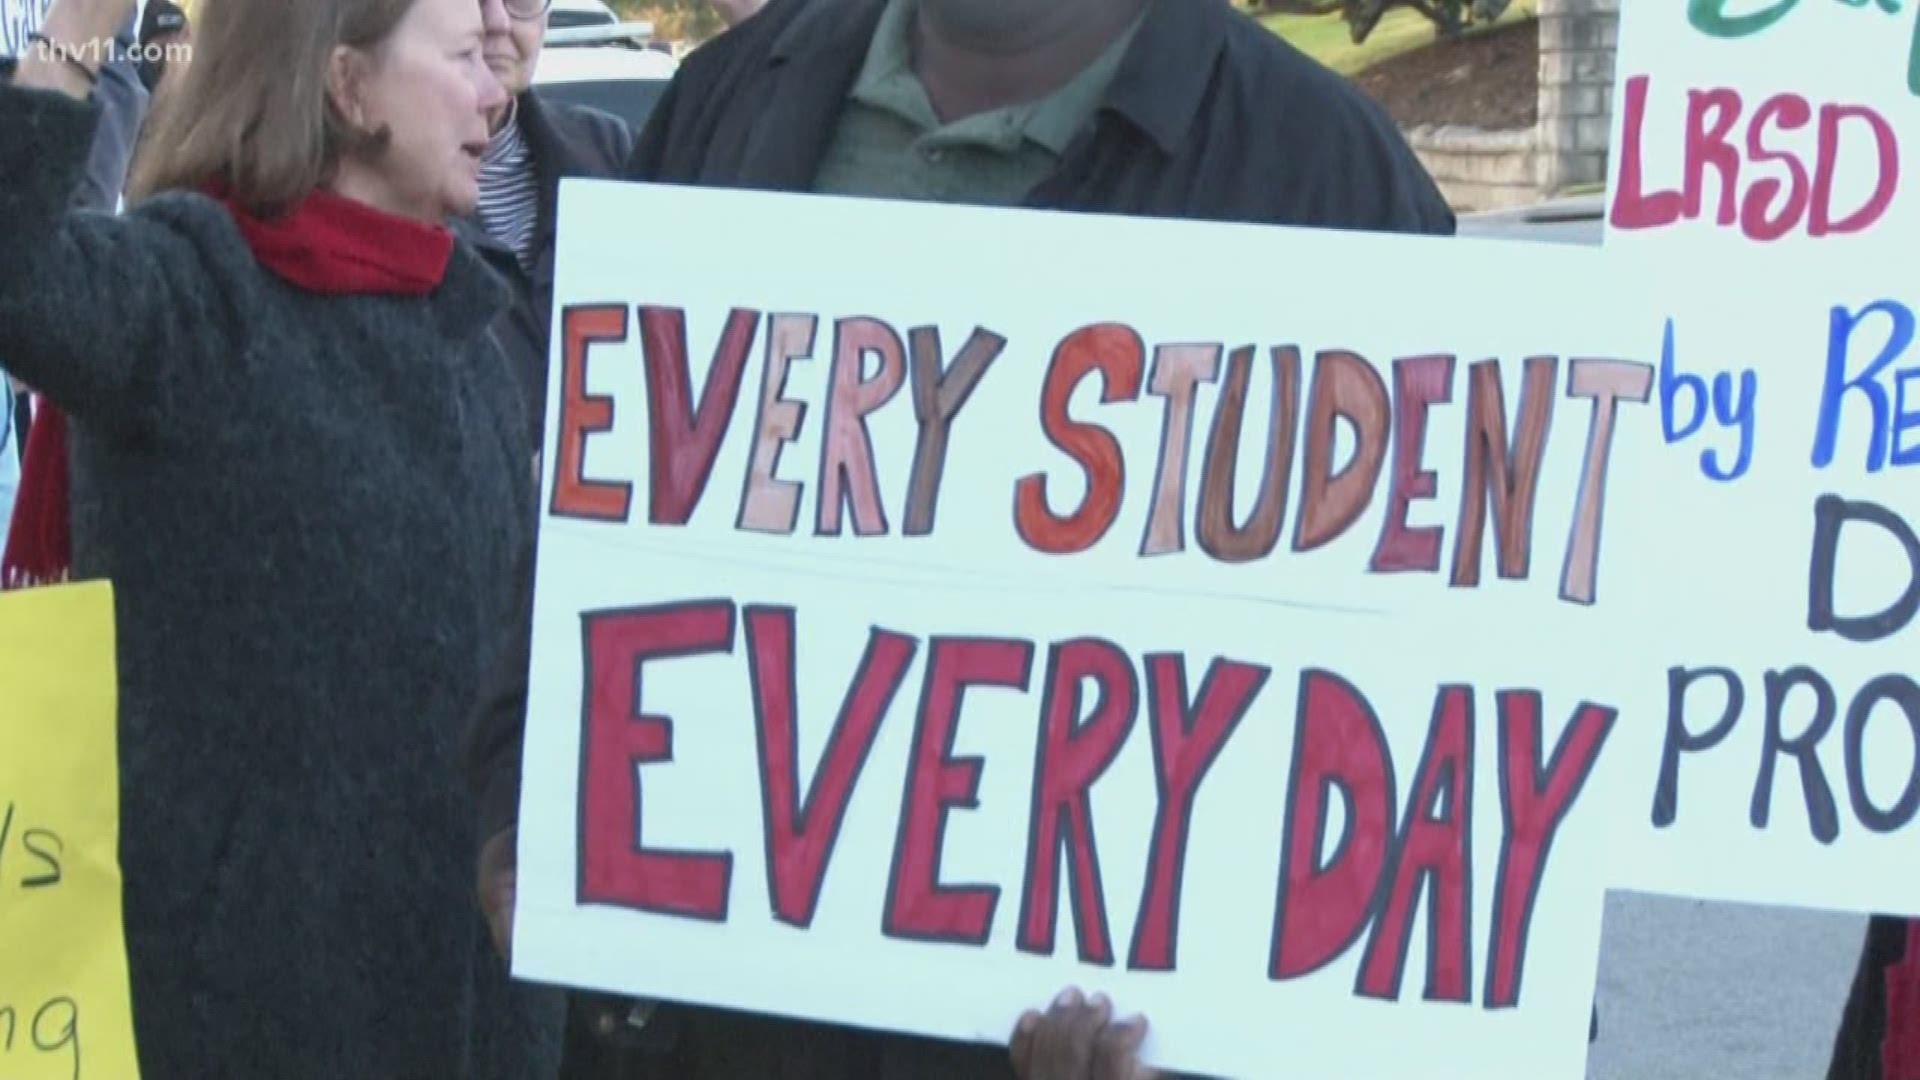 This morning the little rock school's coalition rallied at Martin Luther King Elementary School. As that contract deadline draws closer, they're continuing to push for action.